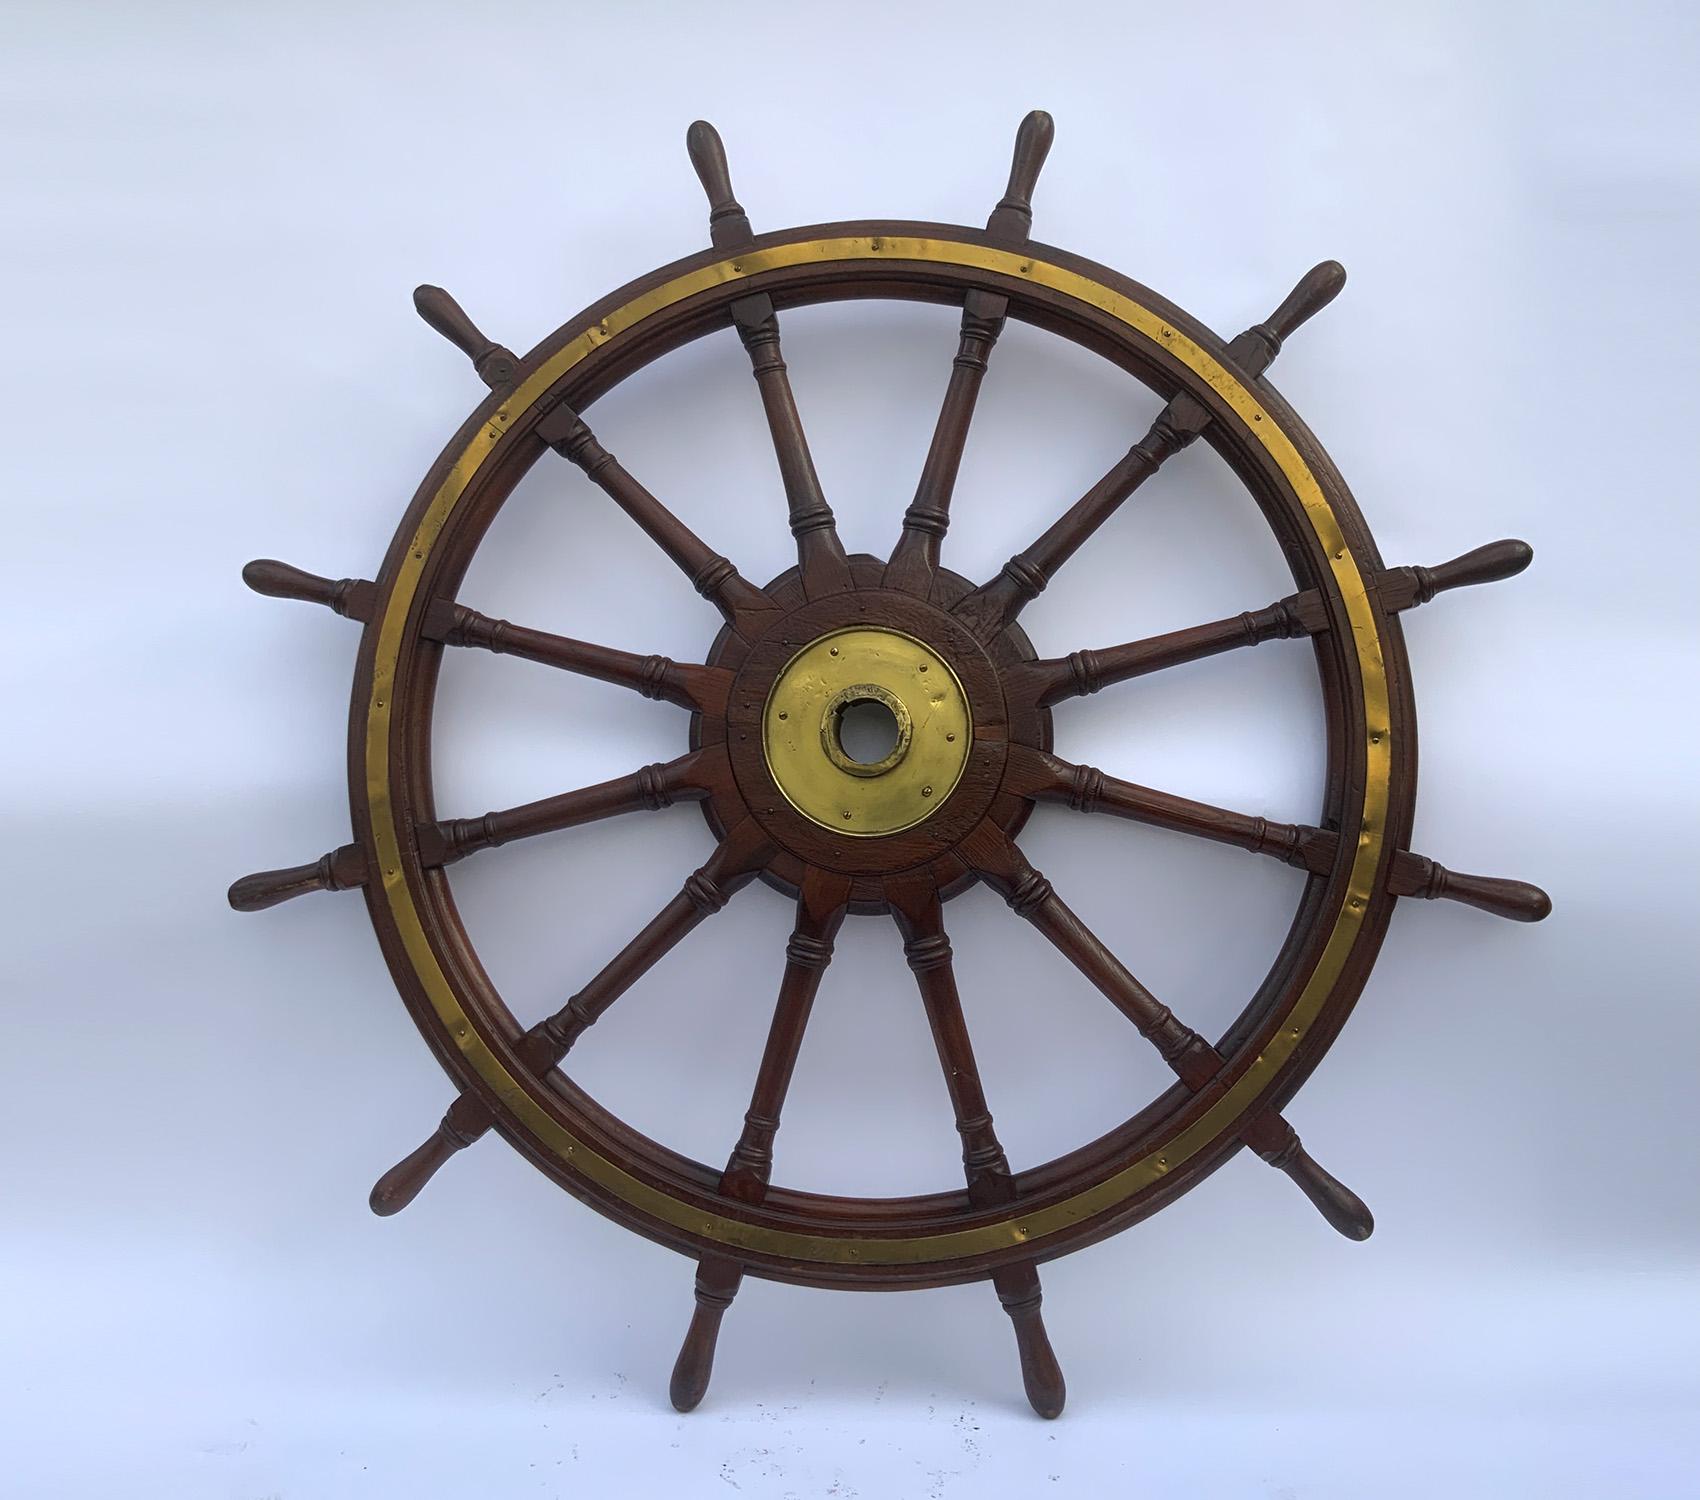 Twelve spoke varnished wood ships wheel with inlaid ring and brass hub. Carved spindles with extra details. Very impressive. 

Weight: 138 LBS
Overall Dimensions: 79